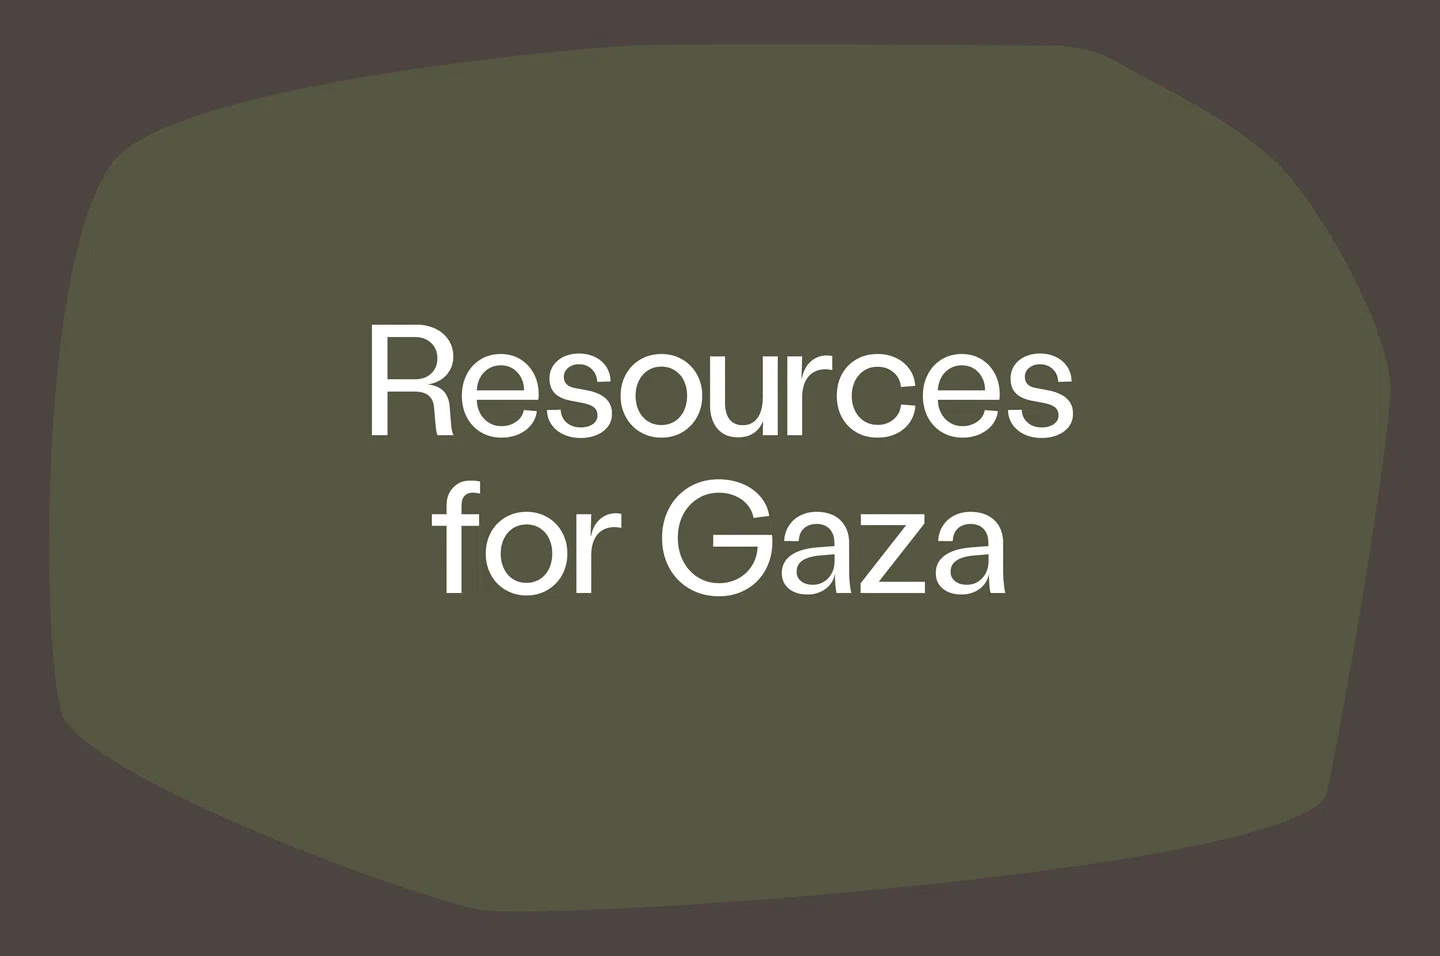 Resources for Gaza-01.png